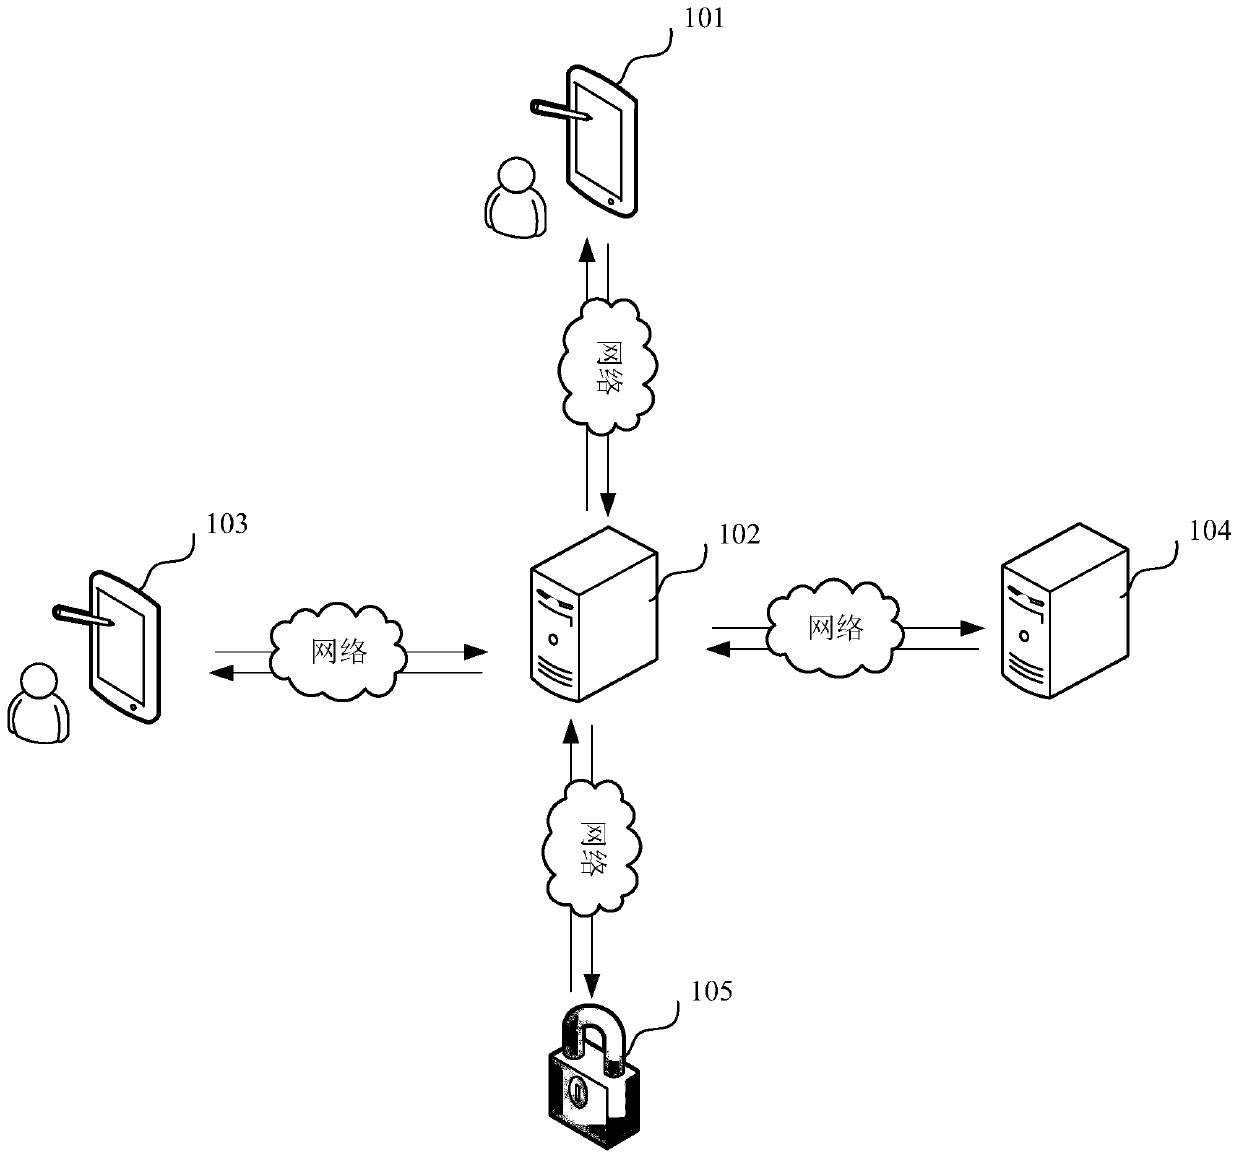 Blockchain-based access control method and device